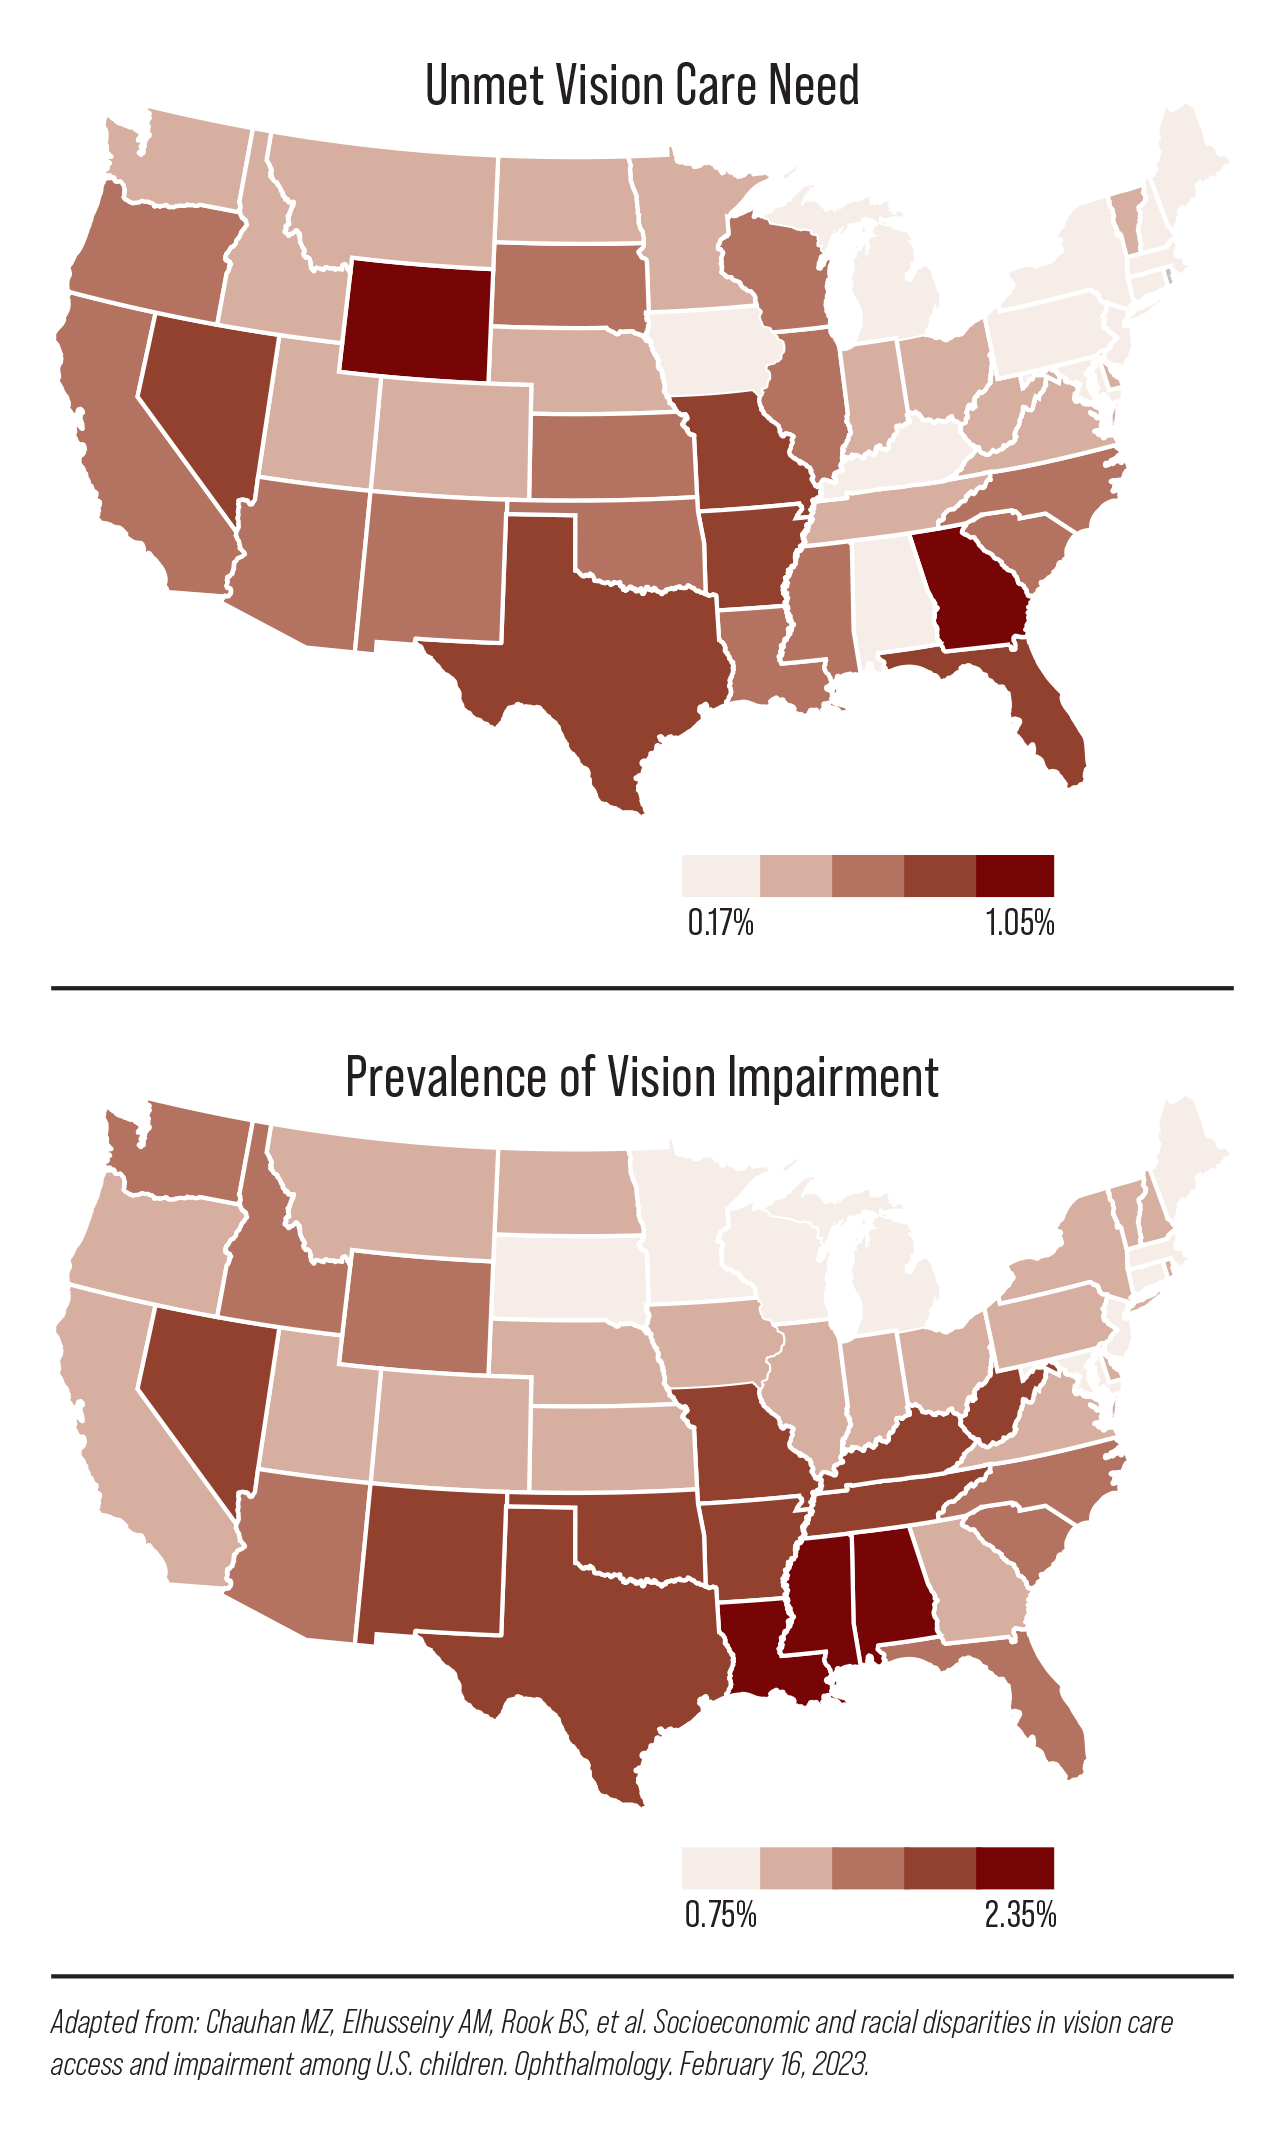 Unmet vision care needs were found to be highest in southern states, with non-Hispanic Black children more likely to report this discrepancy than their non-Hispanic white counterparts.